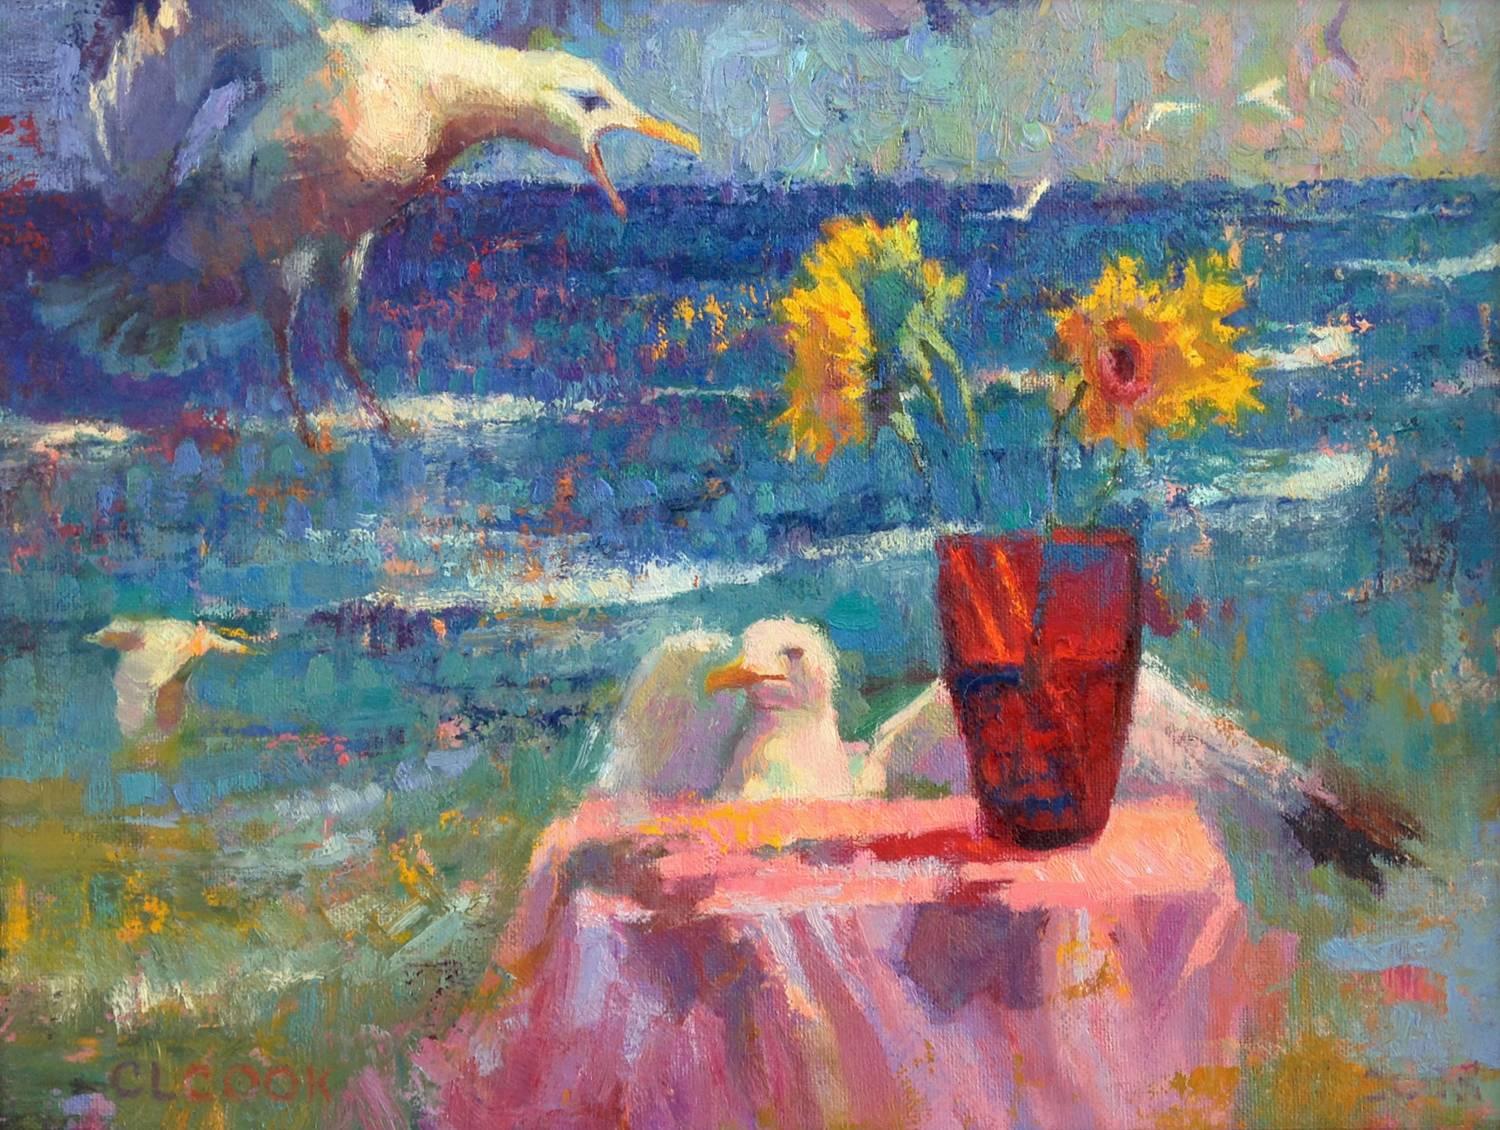 Seagulls and Shattered Sun; Malibu - Painting by Christopher Cook